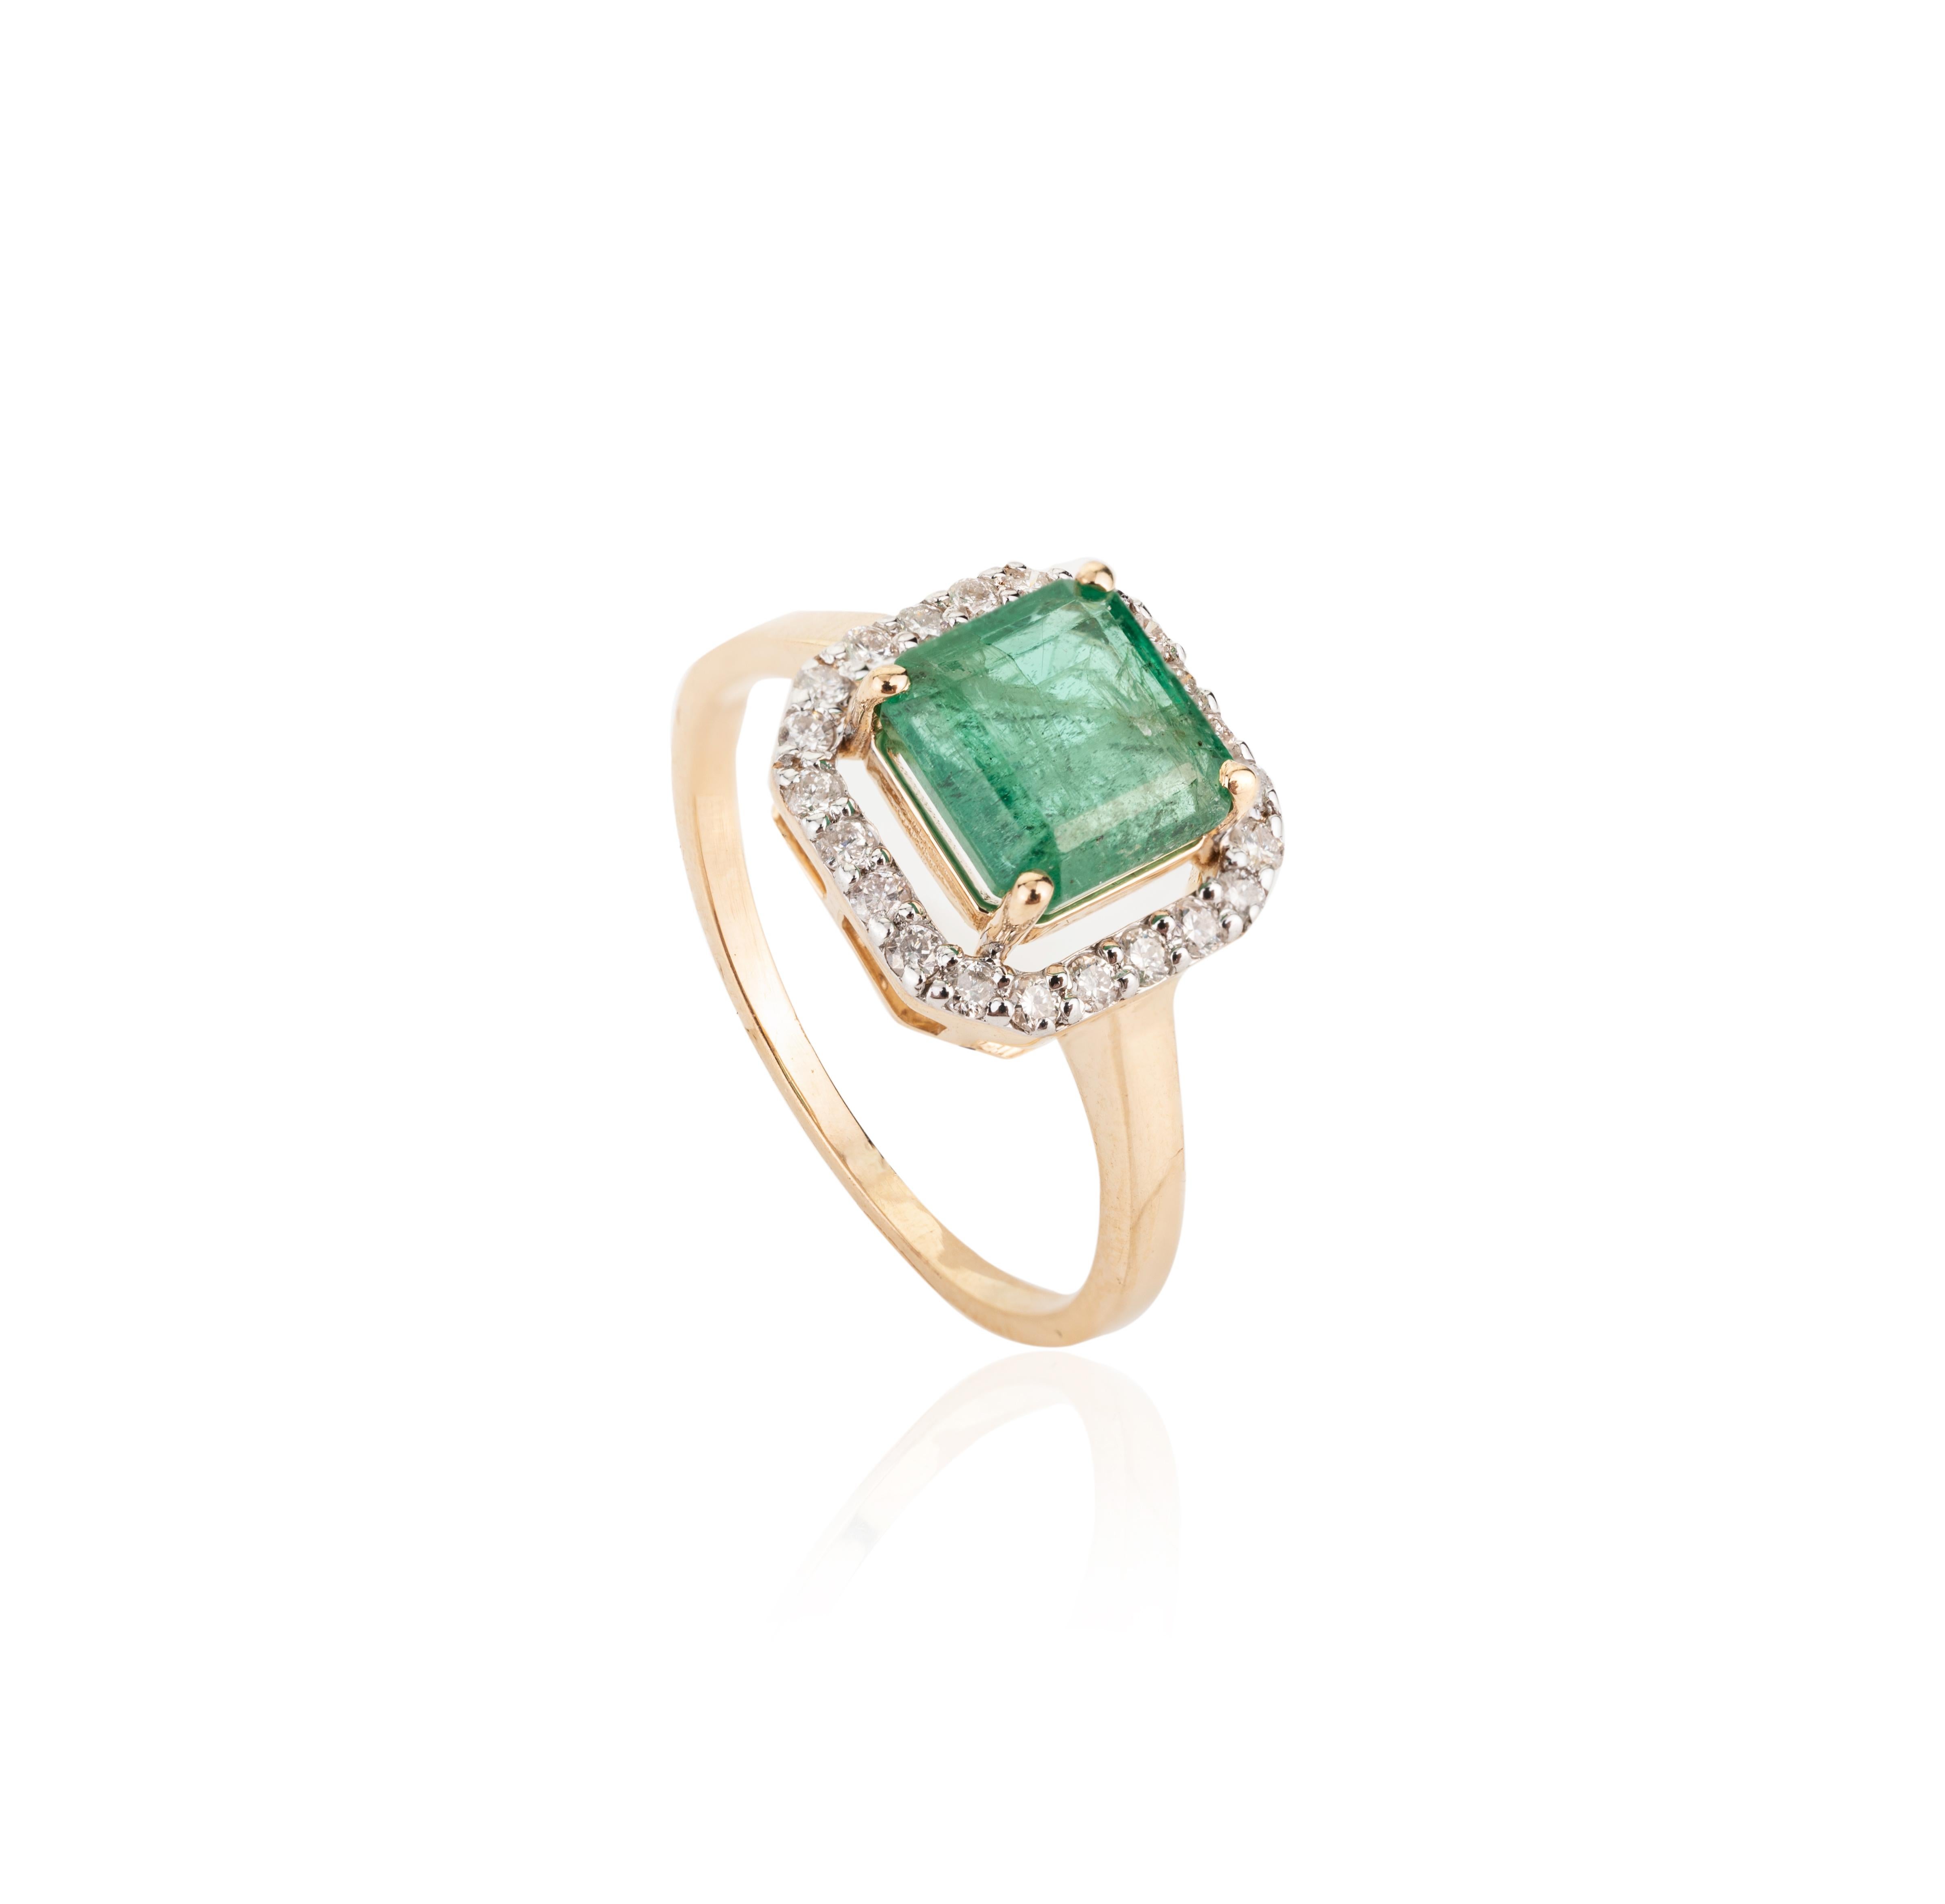 For Sale:  Certified 2.7 Carat Octagon Emerald Halo Diamond Wedding Ring in 18k Yellow Gold 7